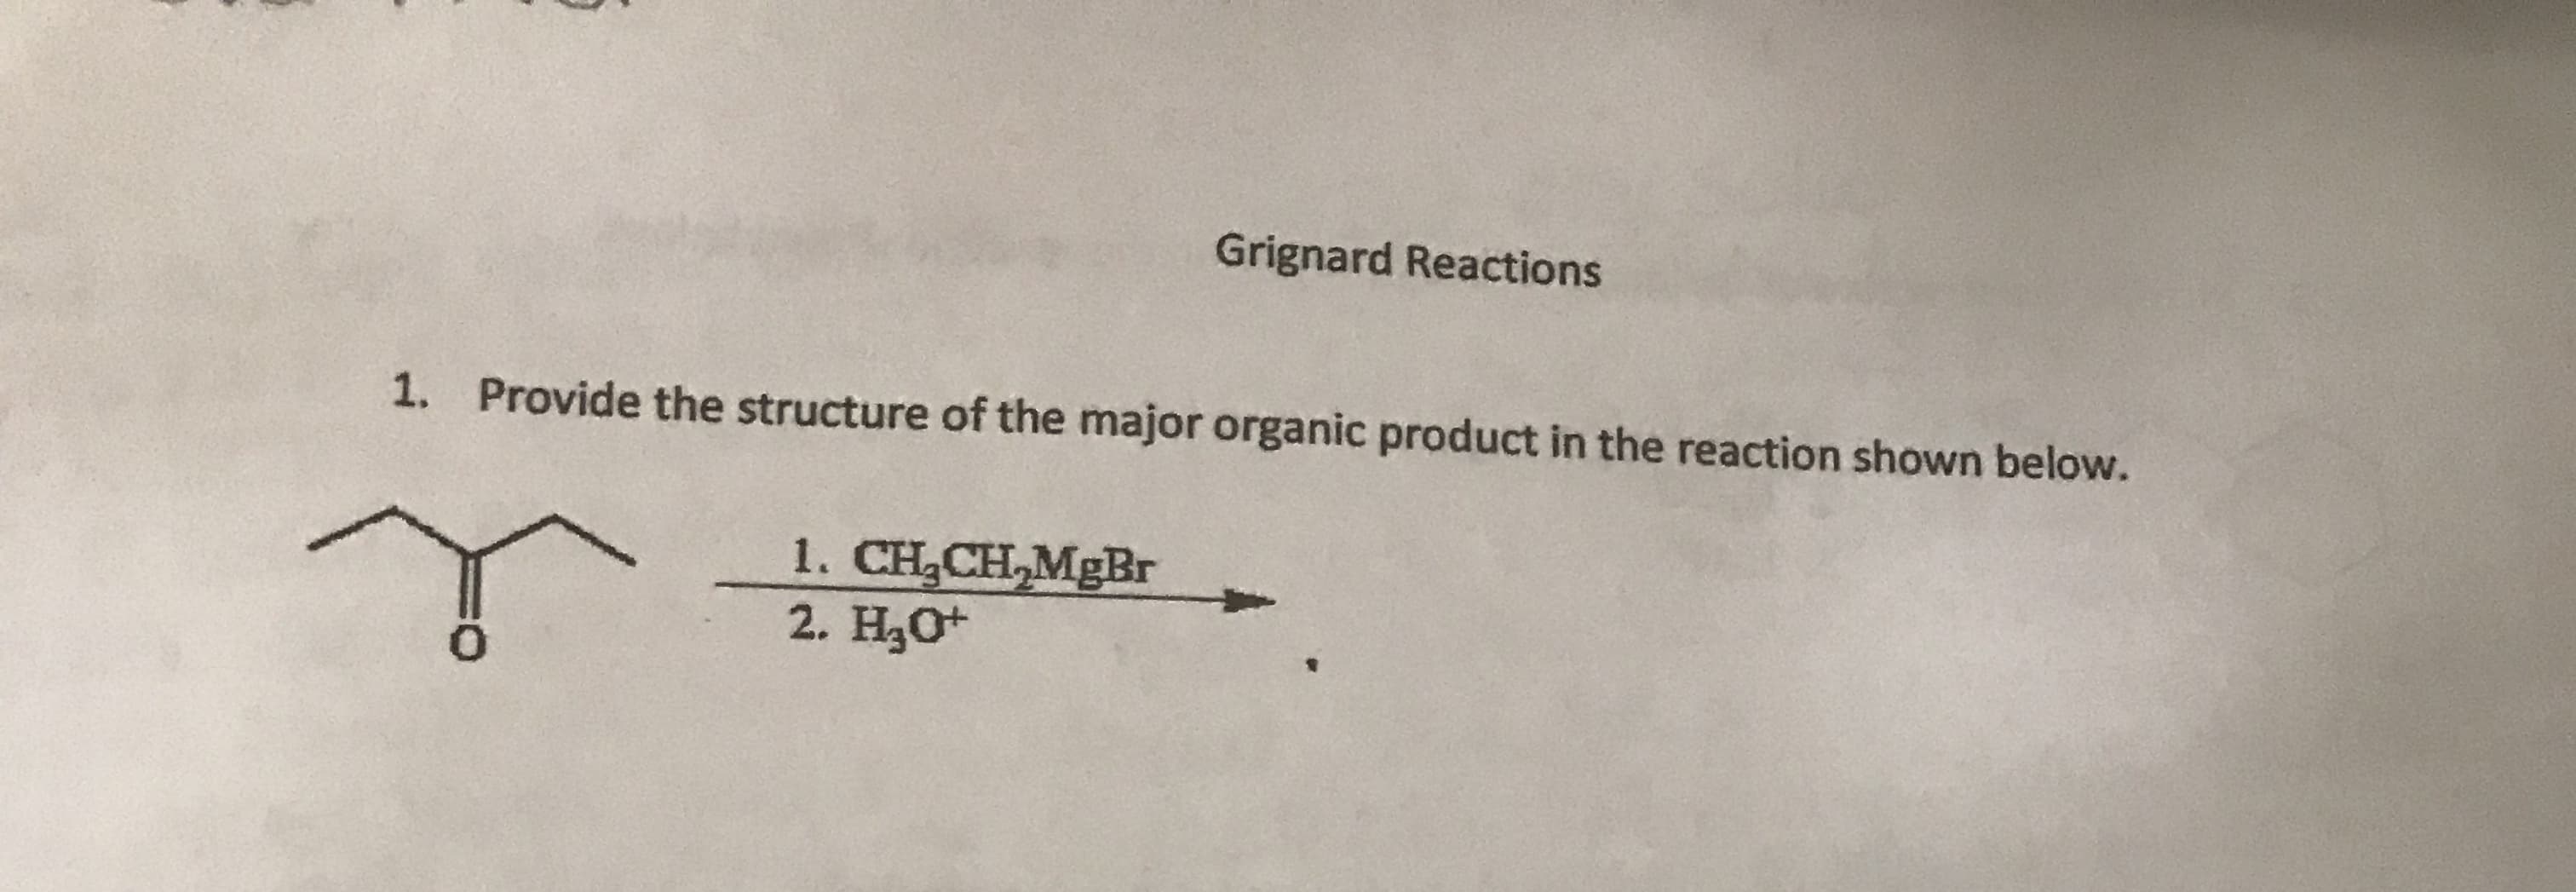 Grignard Reactions
Provide the structure of the major organic product in the reaction shown below.
1.
1. CH2CH,MgBr
2. H20*
